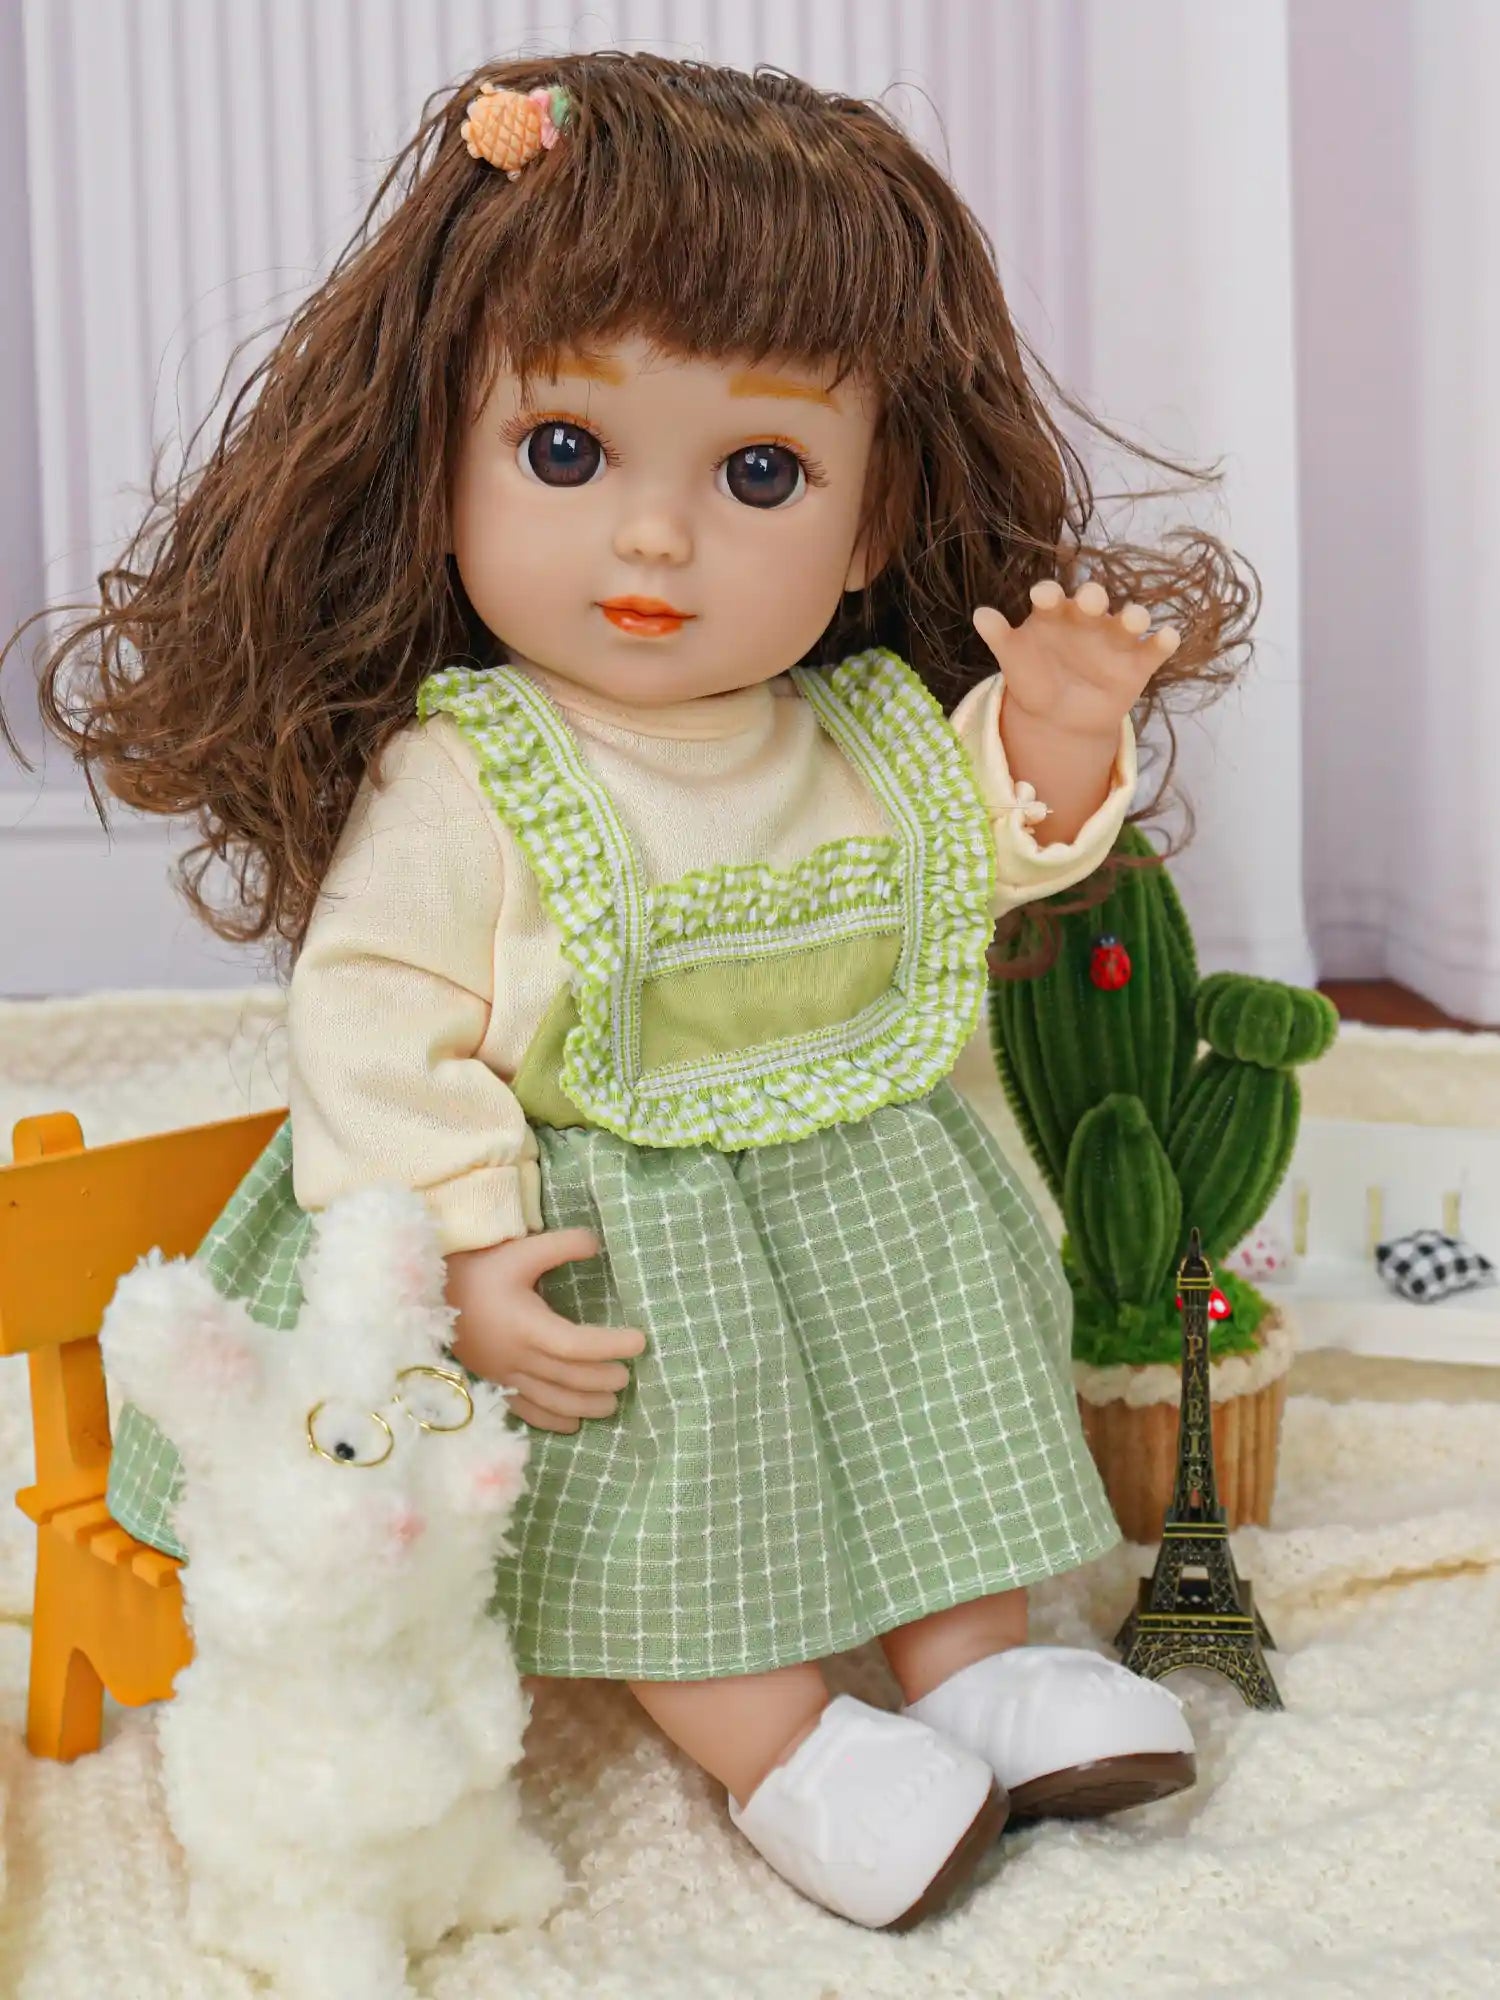 Doll in a green pinafore dress, waving, with fluffy dog toys and indoor plant.